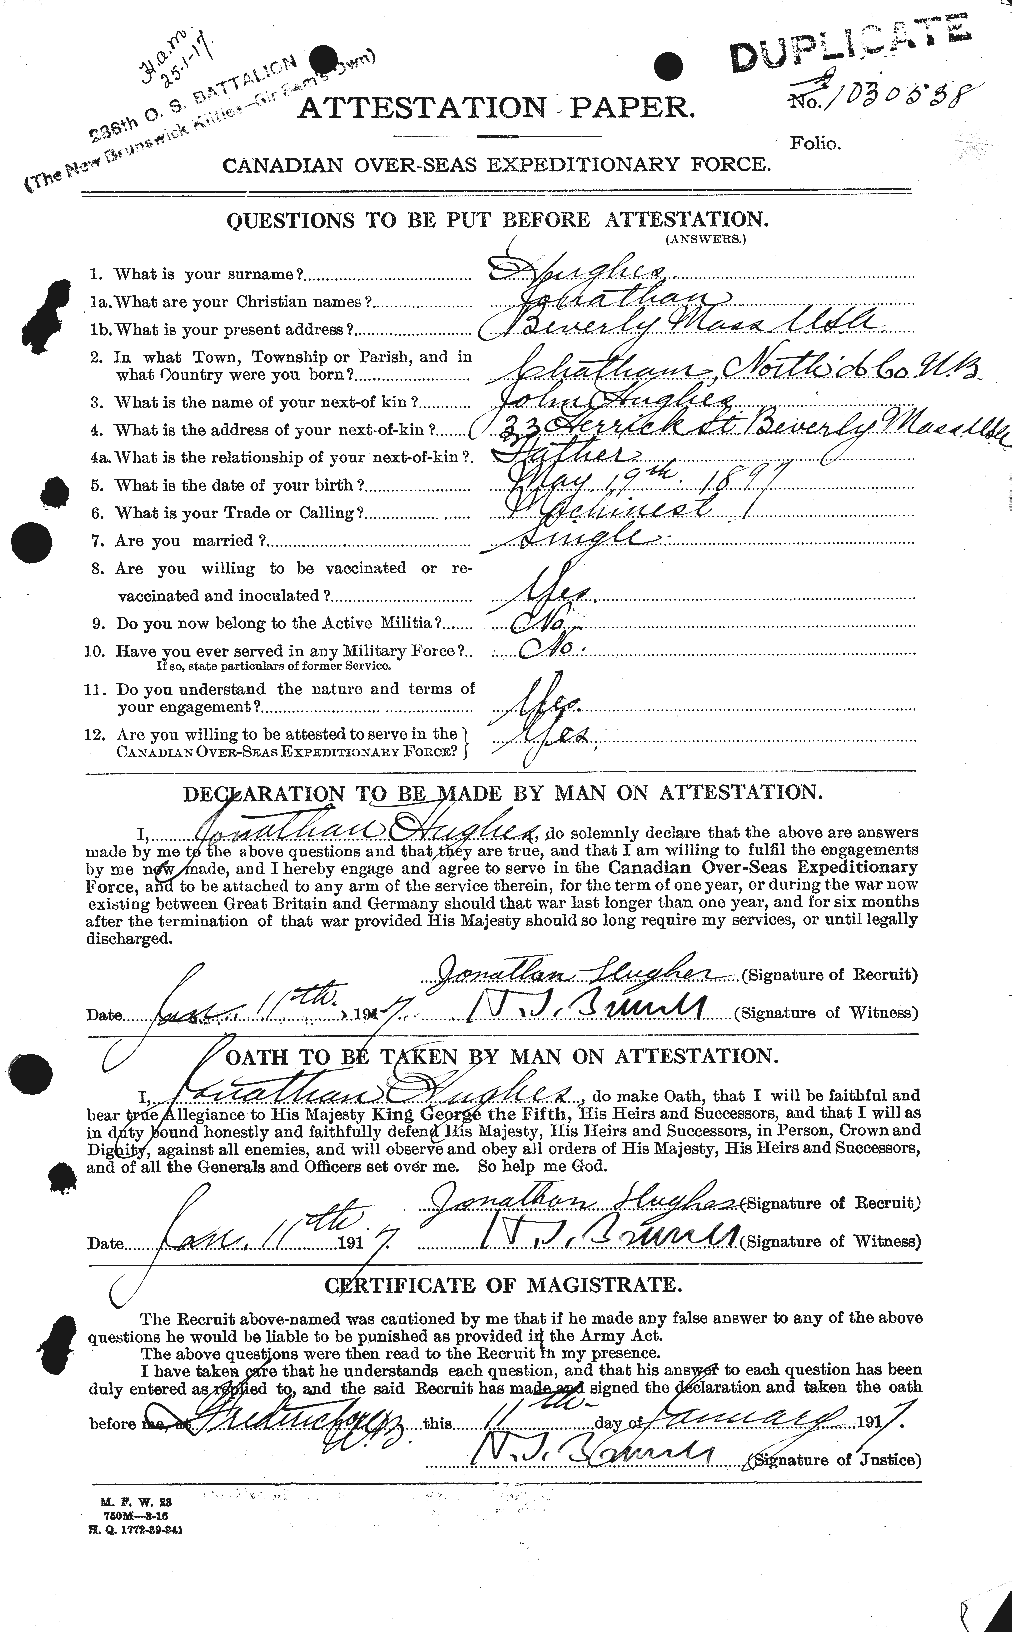 Personnel Records of the First World War - CEF 404063a